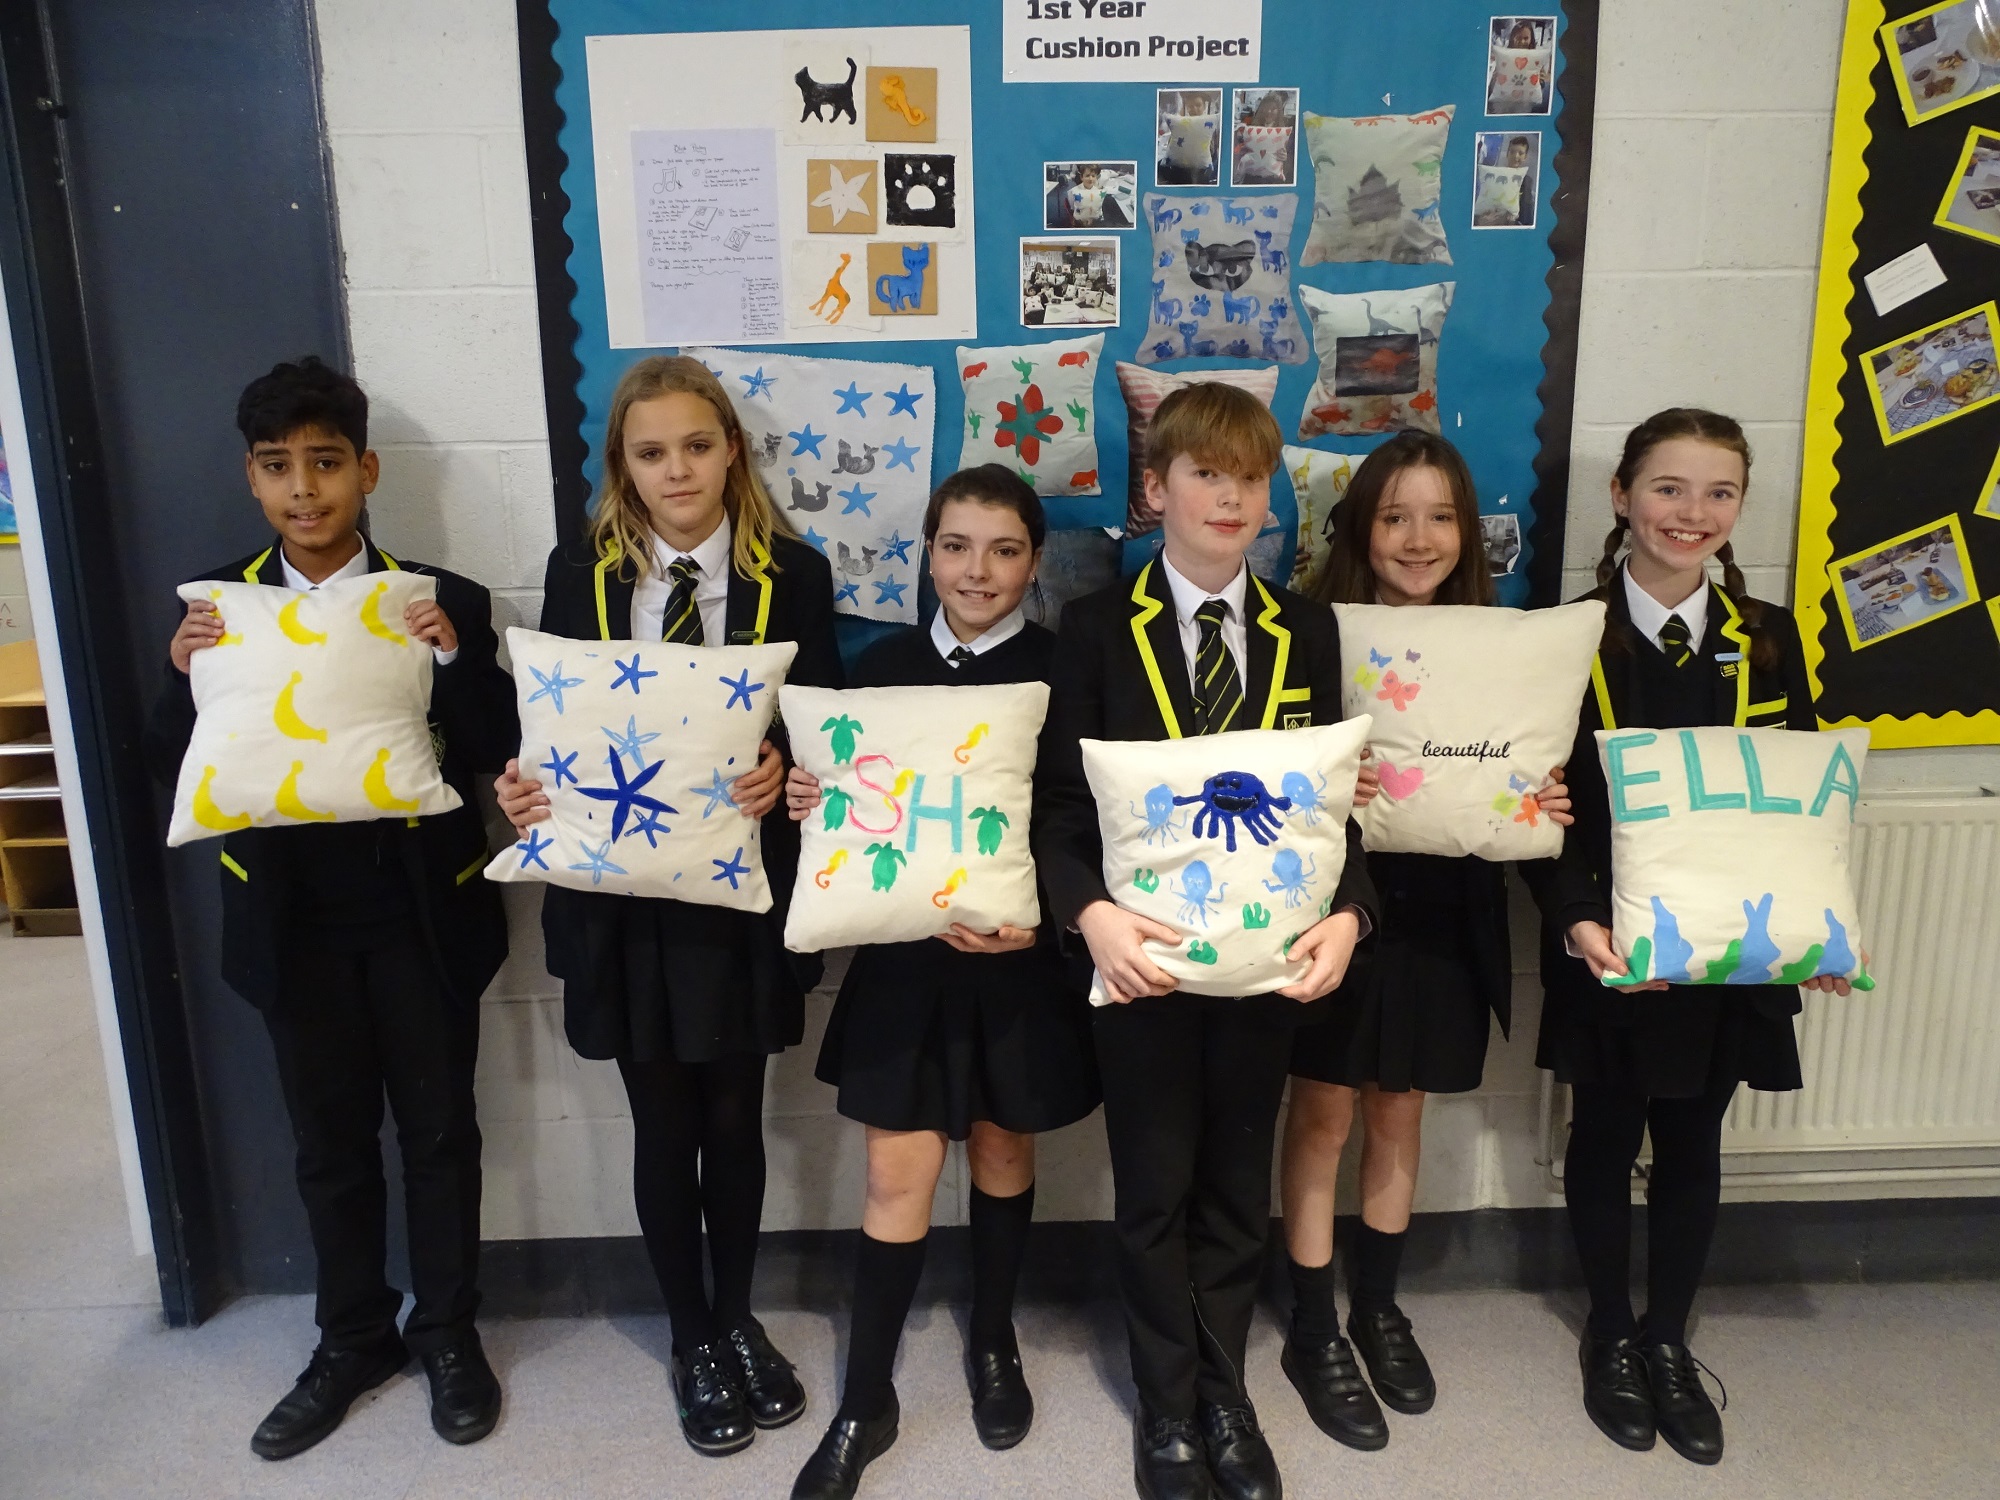 First Year pupils with their finished pillows from the Textiles Technology project